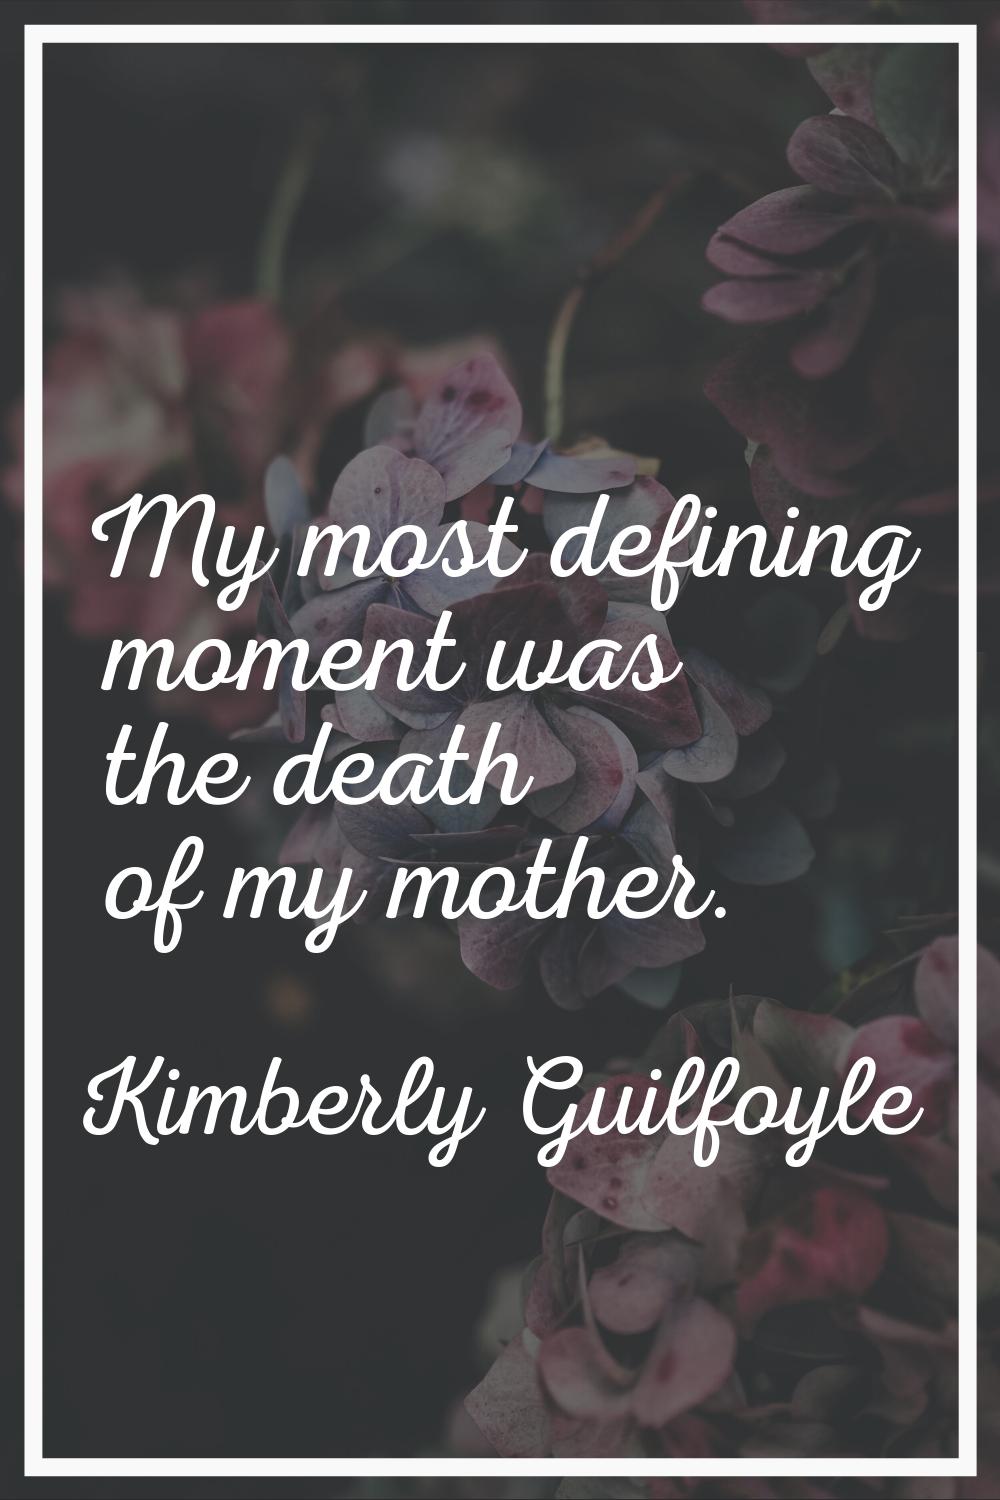 My most defining moment was the death of my mother.